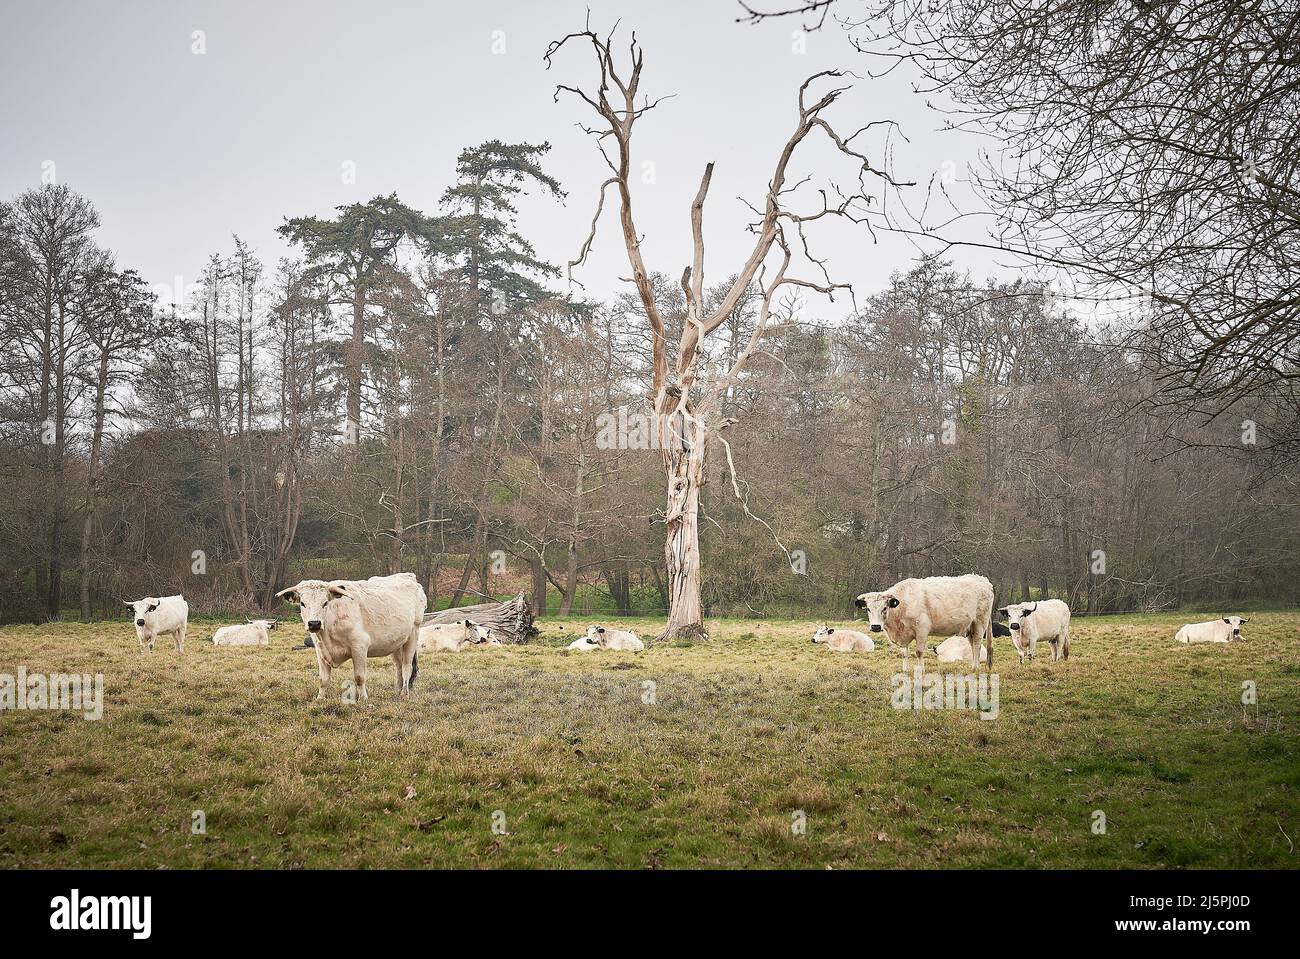 White Park Cattle Rare Breed in field Stock Photo